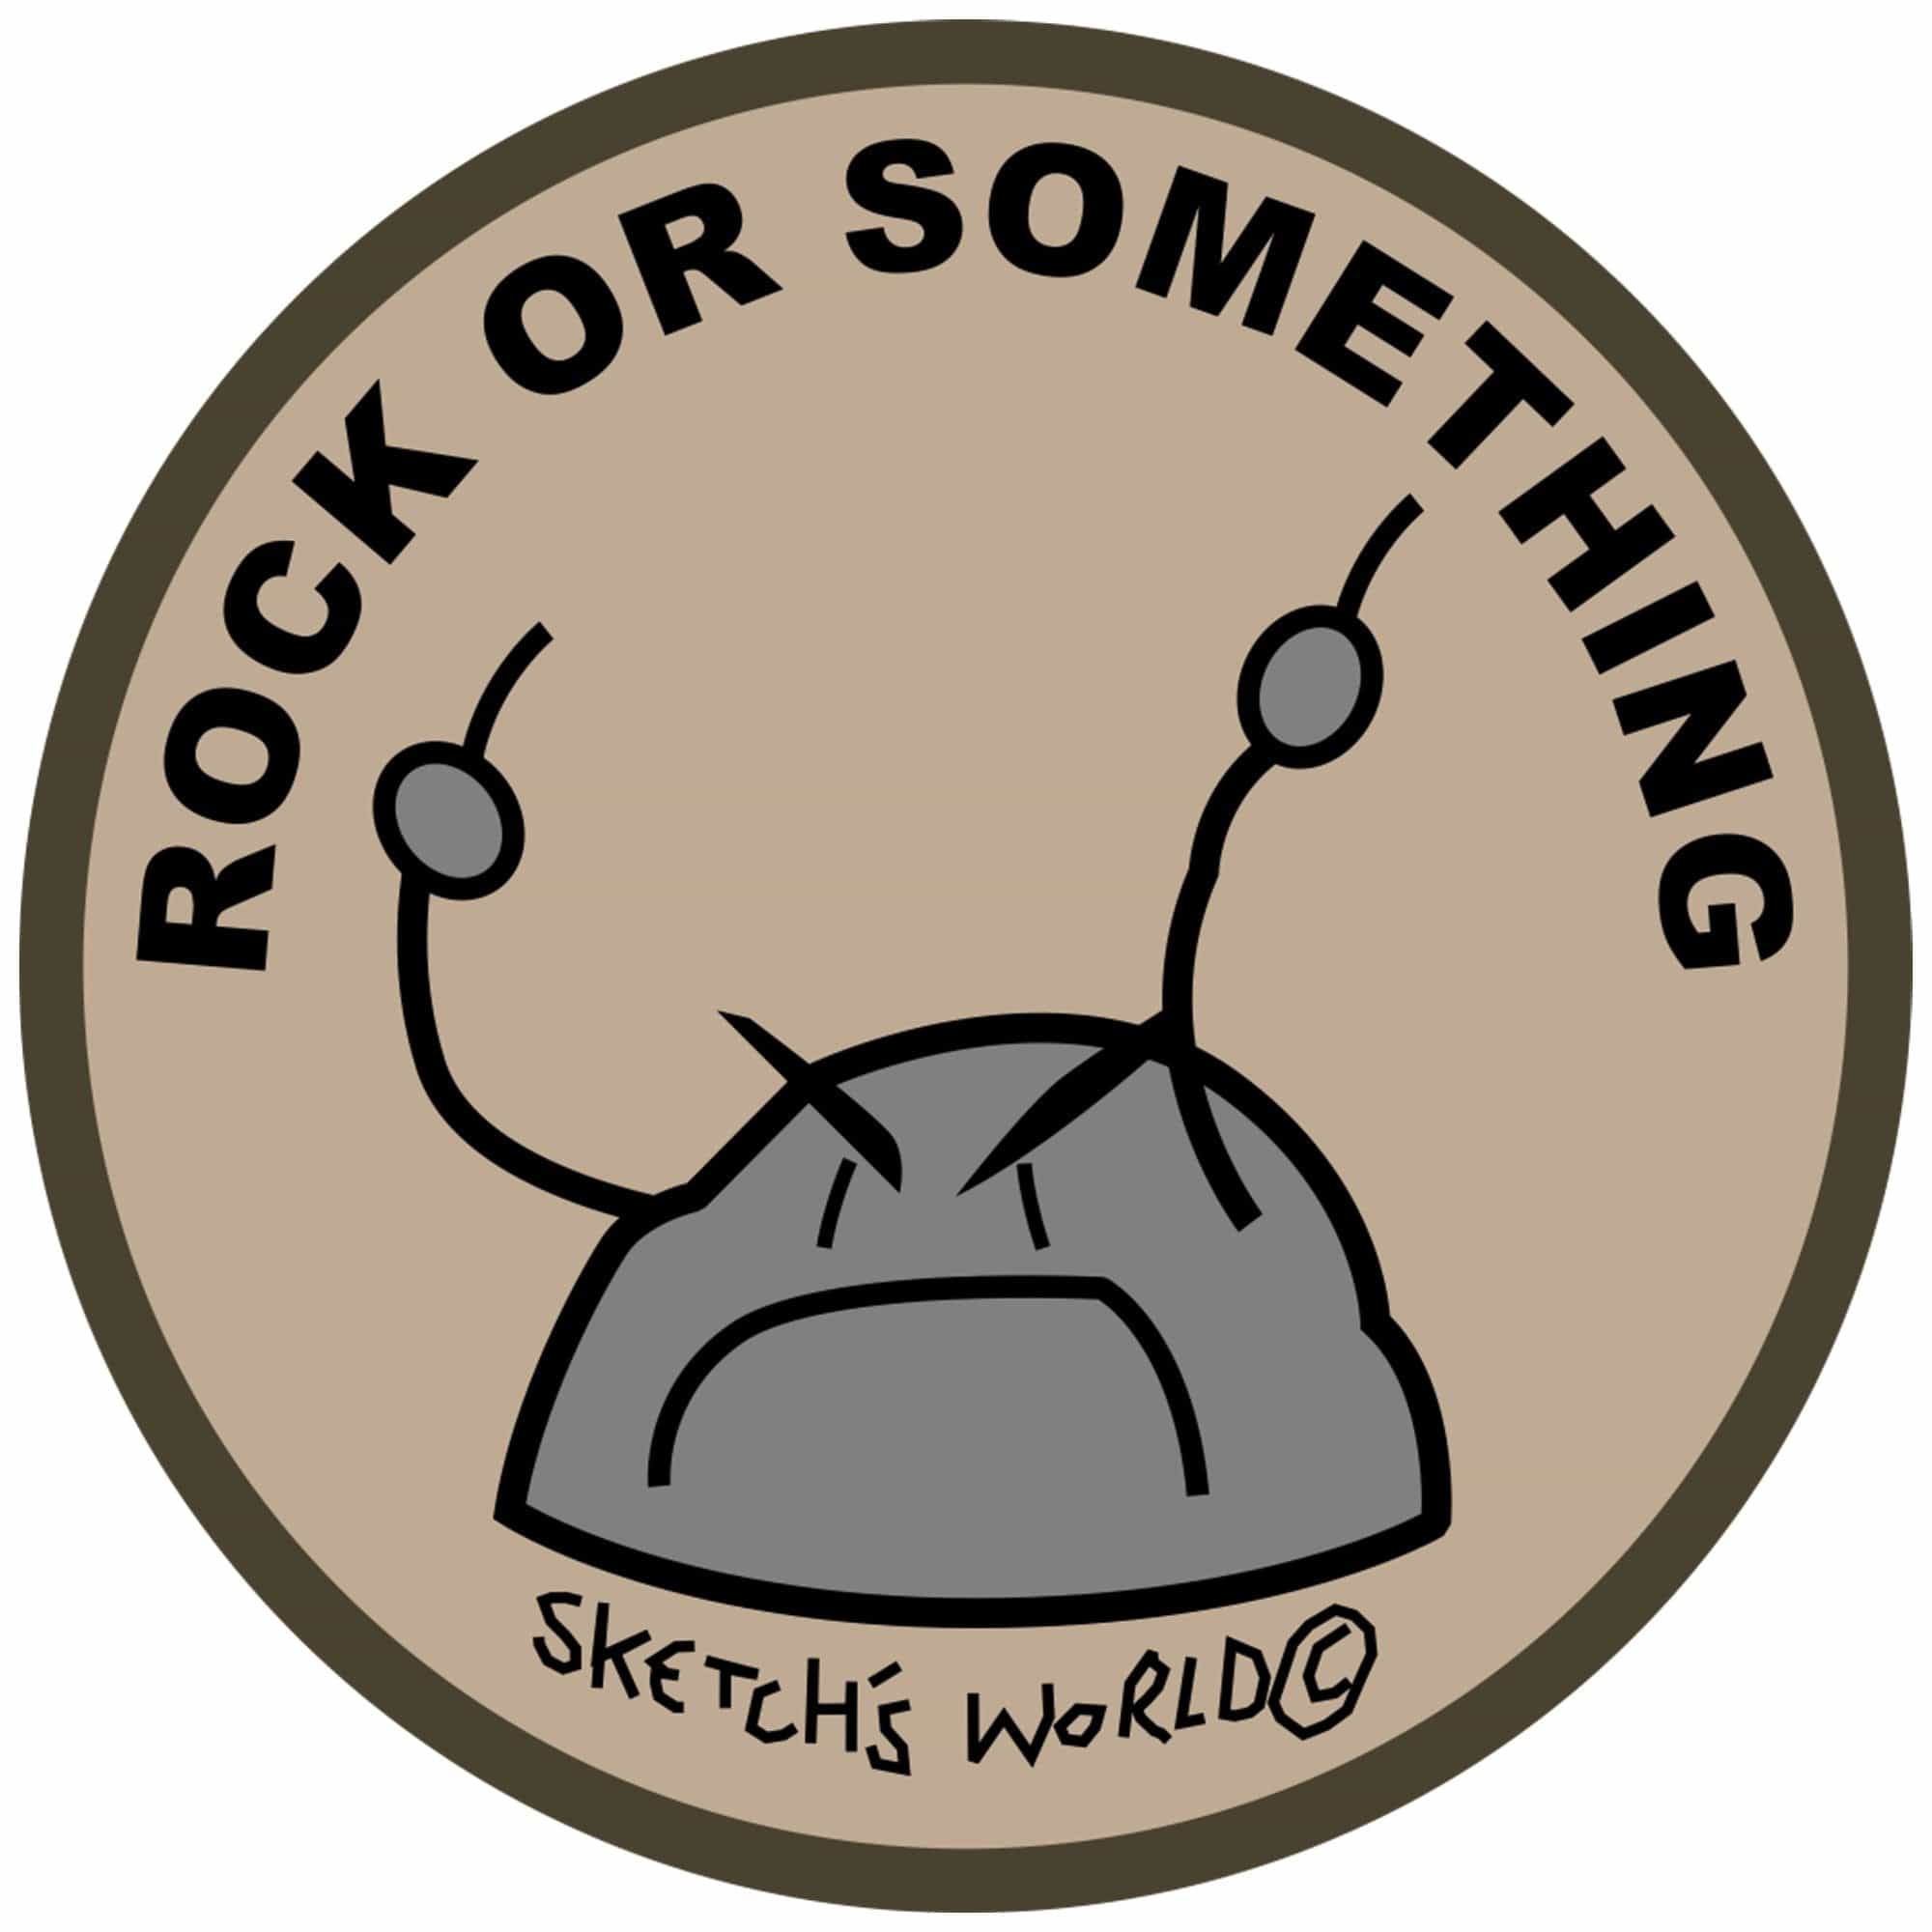 Tactical Gear Junkie Stickers Sketch's World © Officially Licensed - Rock Or Something - 3.5 Inch Sticker